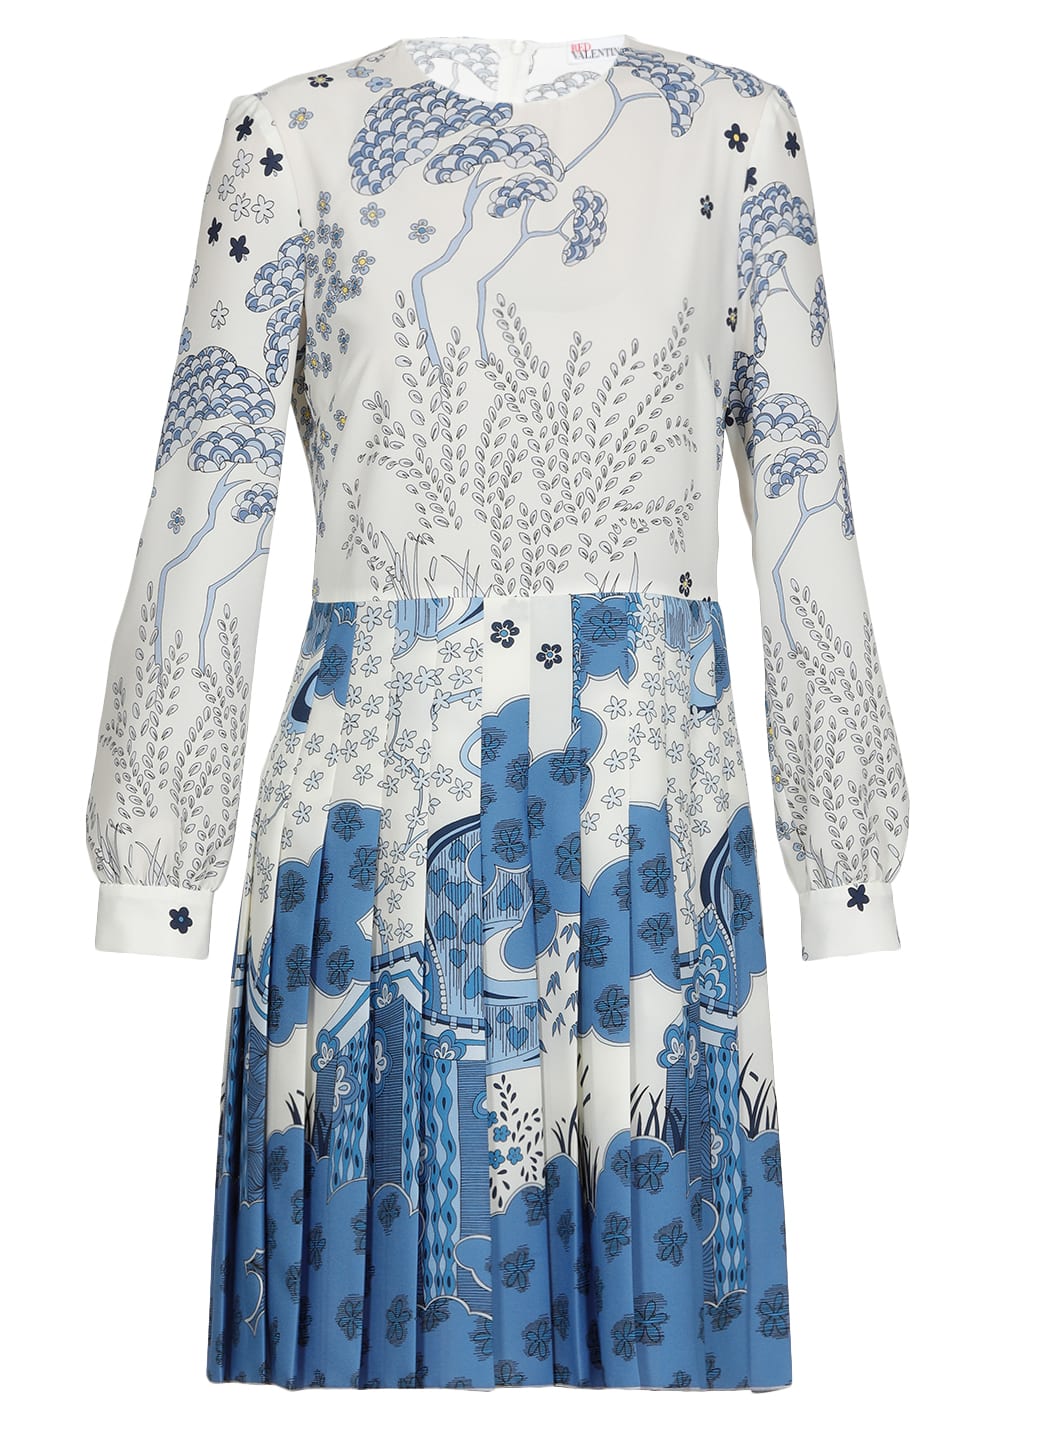 RED Valentino Dress With Crepe De Chine Folds With Oriental Toile De Jouy Print